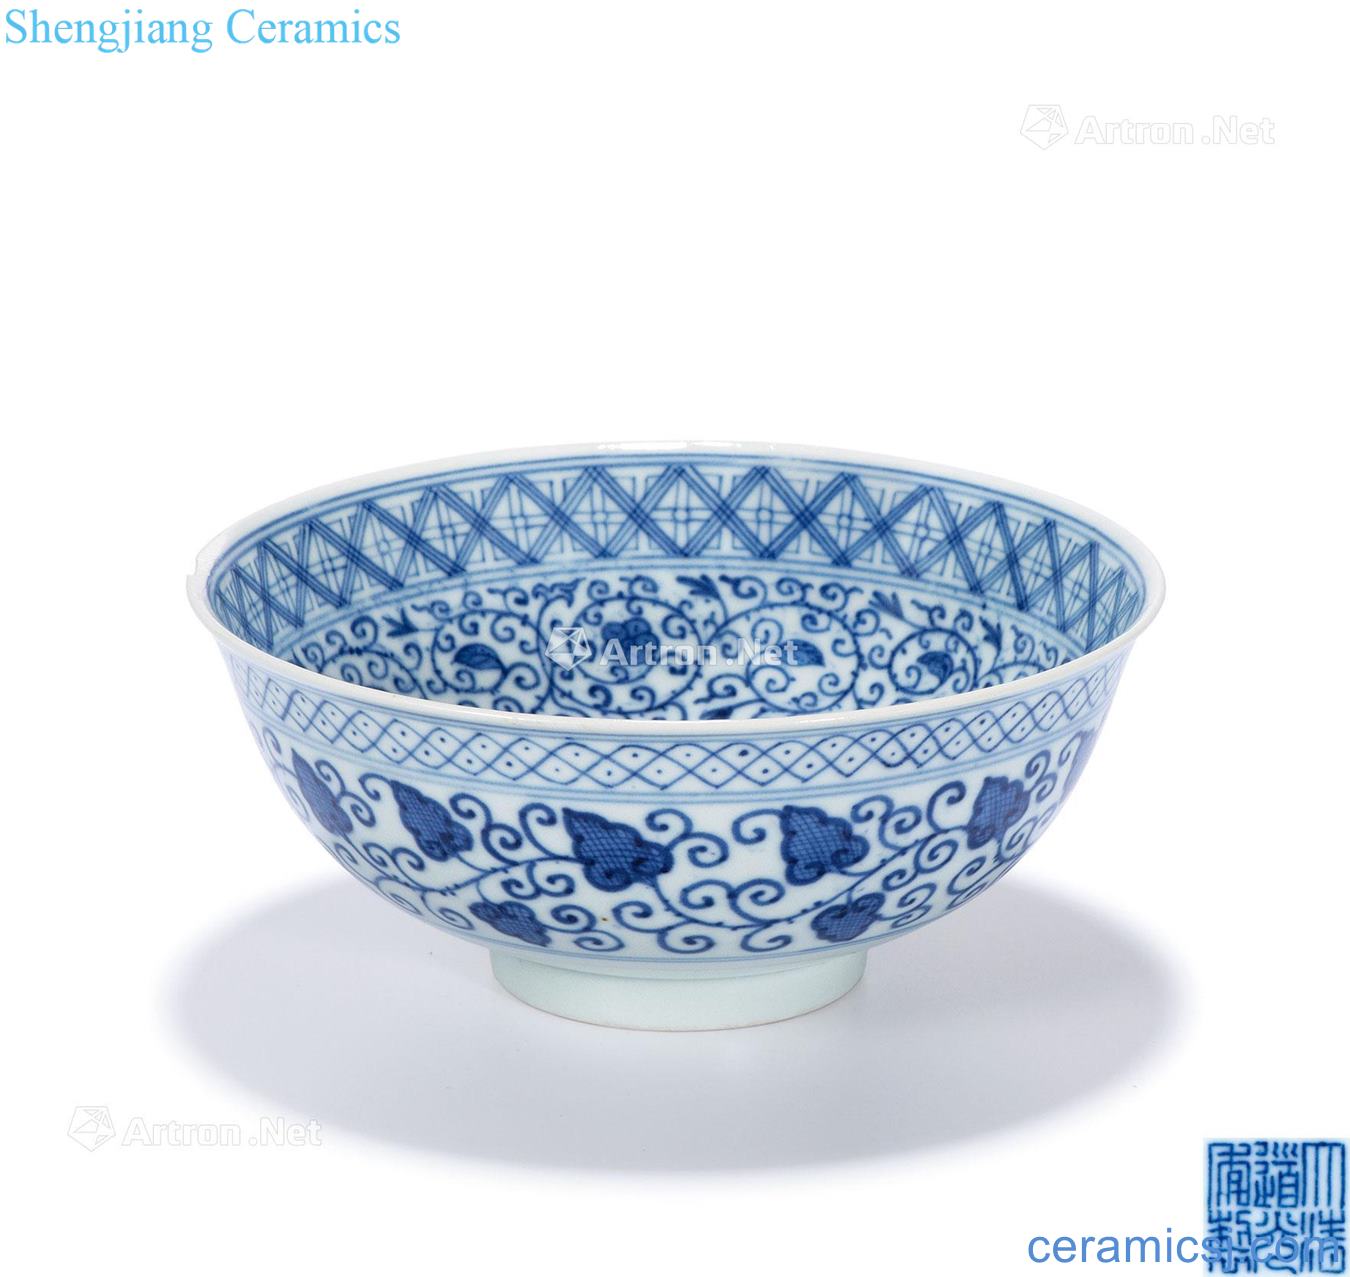 Qing daoguang Imitated yongle blue and white flower grain bowl lotus pond